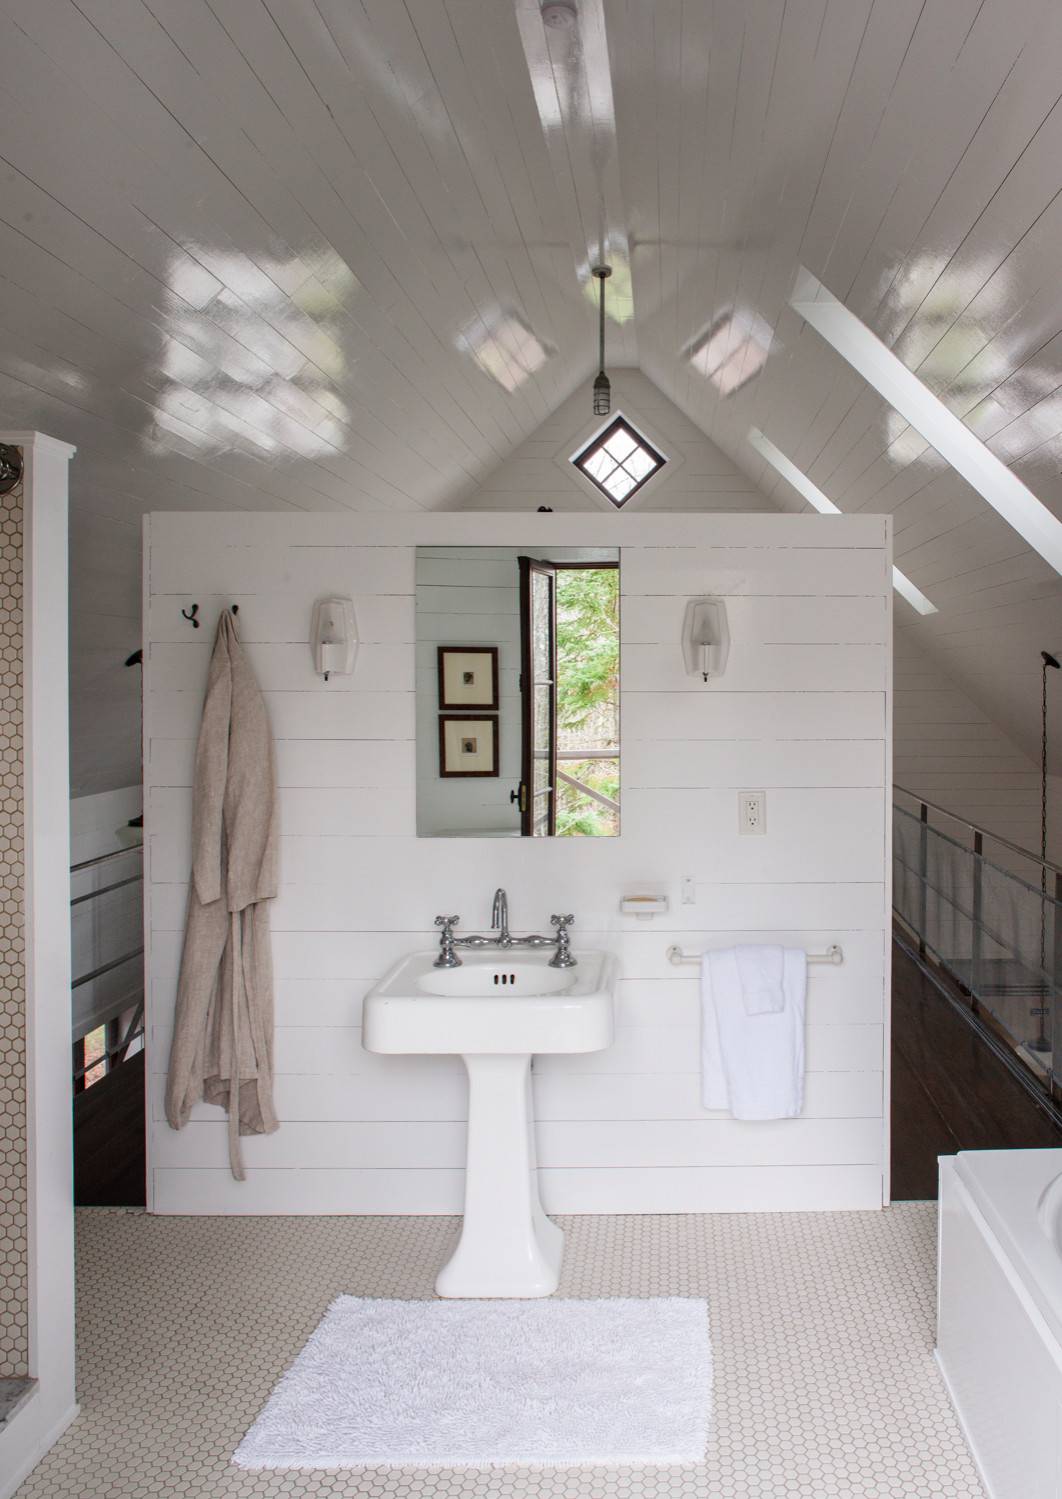 my-houzz-rustic-charm-for-a-sweet-quebec-cabin-laura-garner-img_5041f92b02850342_16-8432-1-a6a8d7e-37334